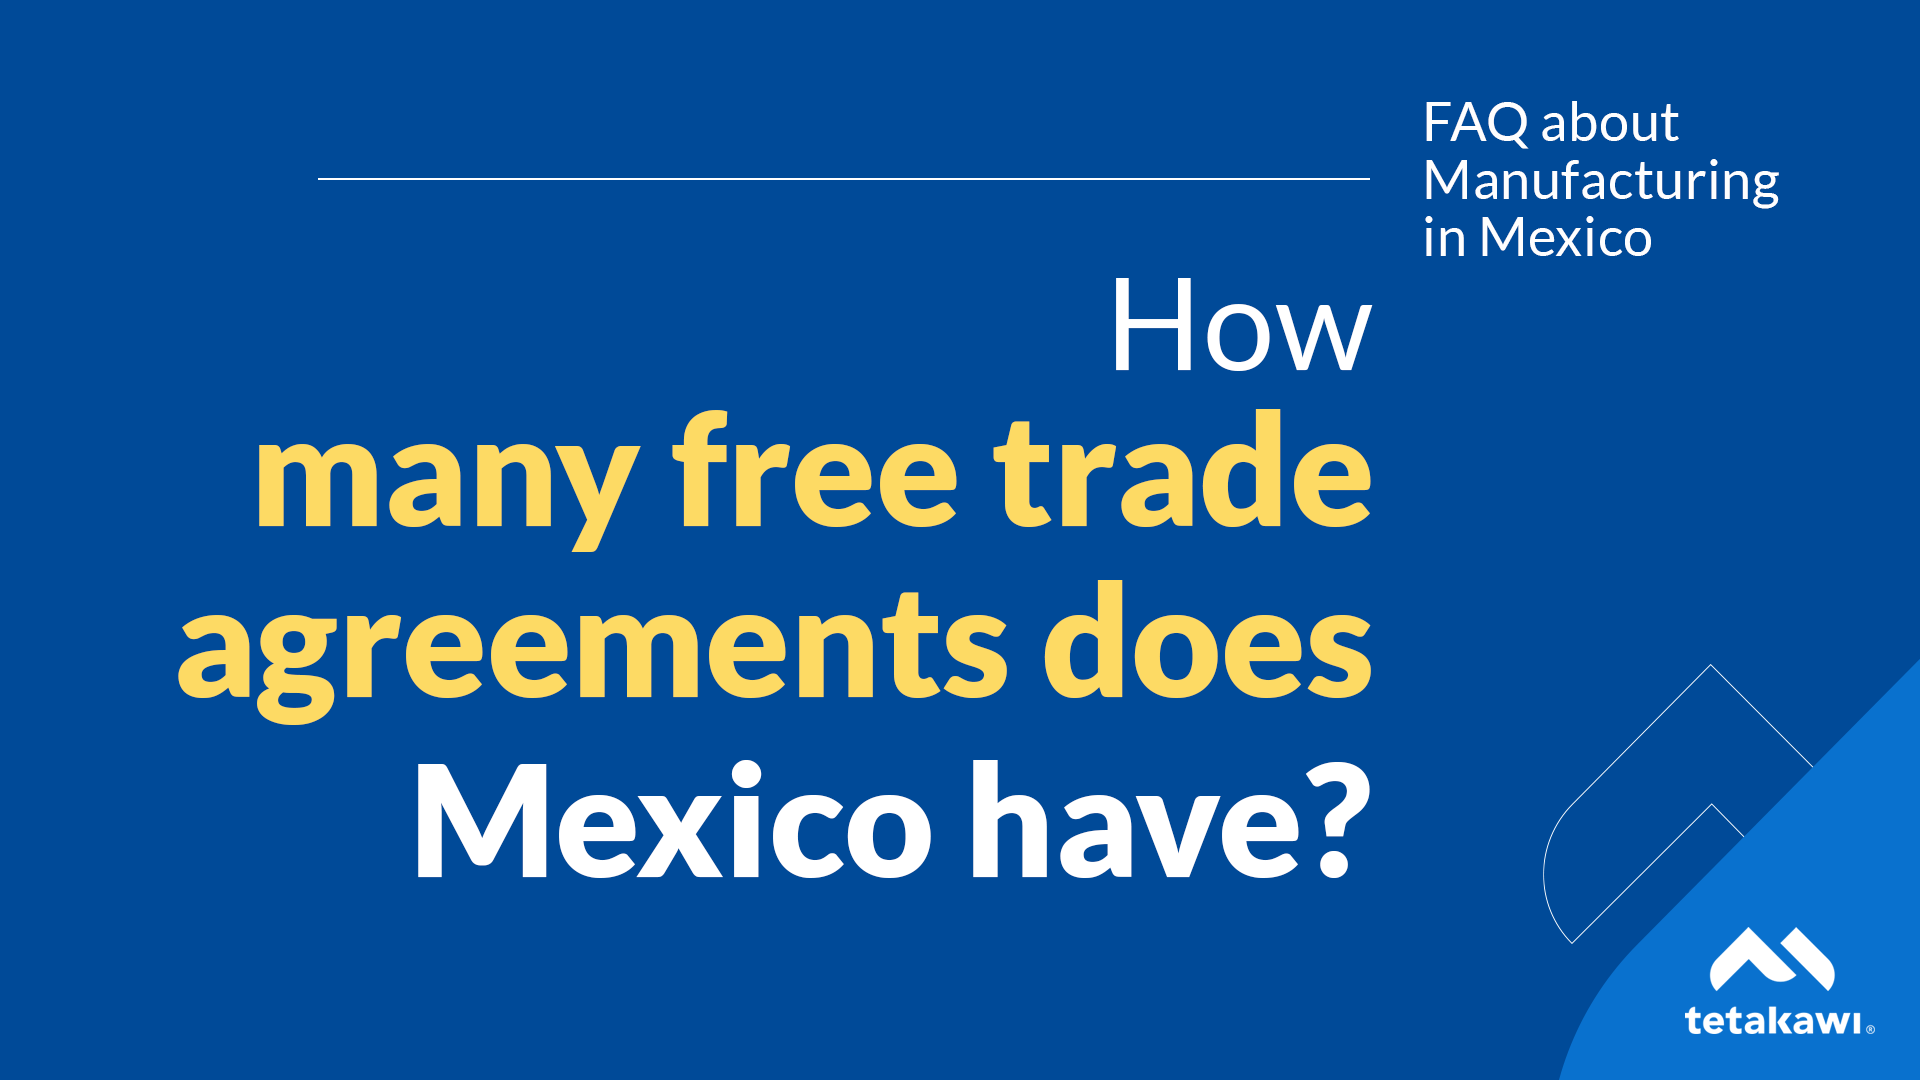 Trade Agreements 